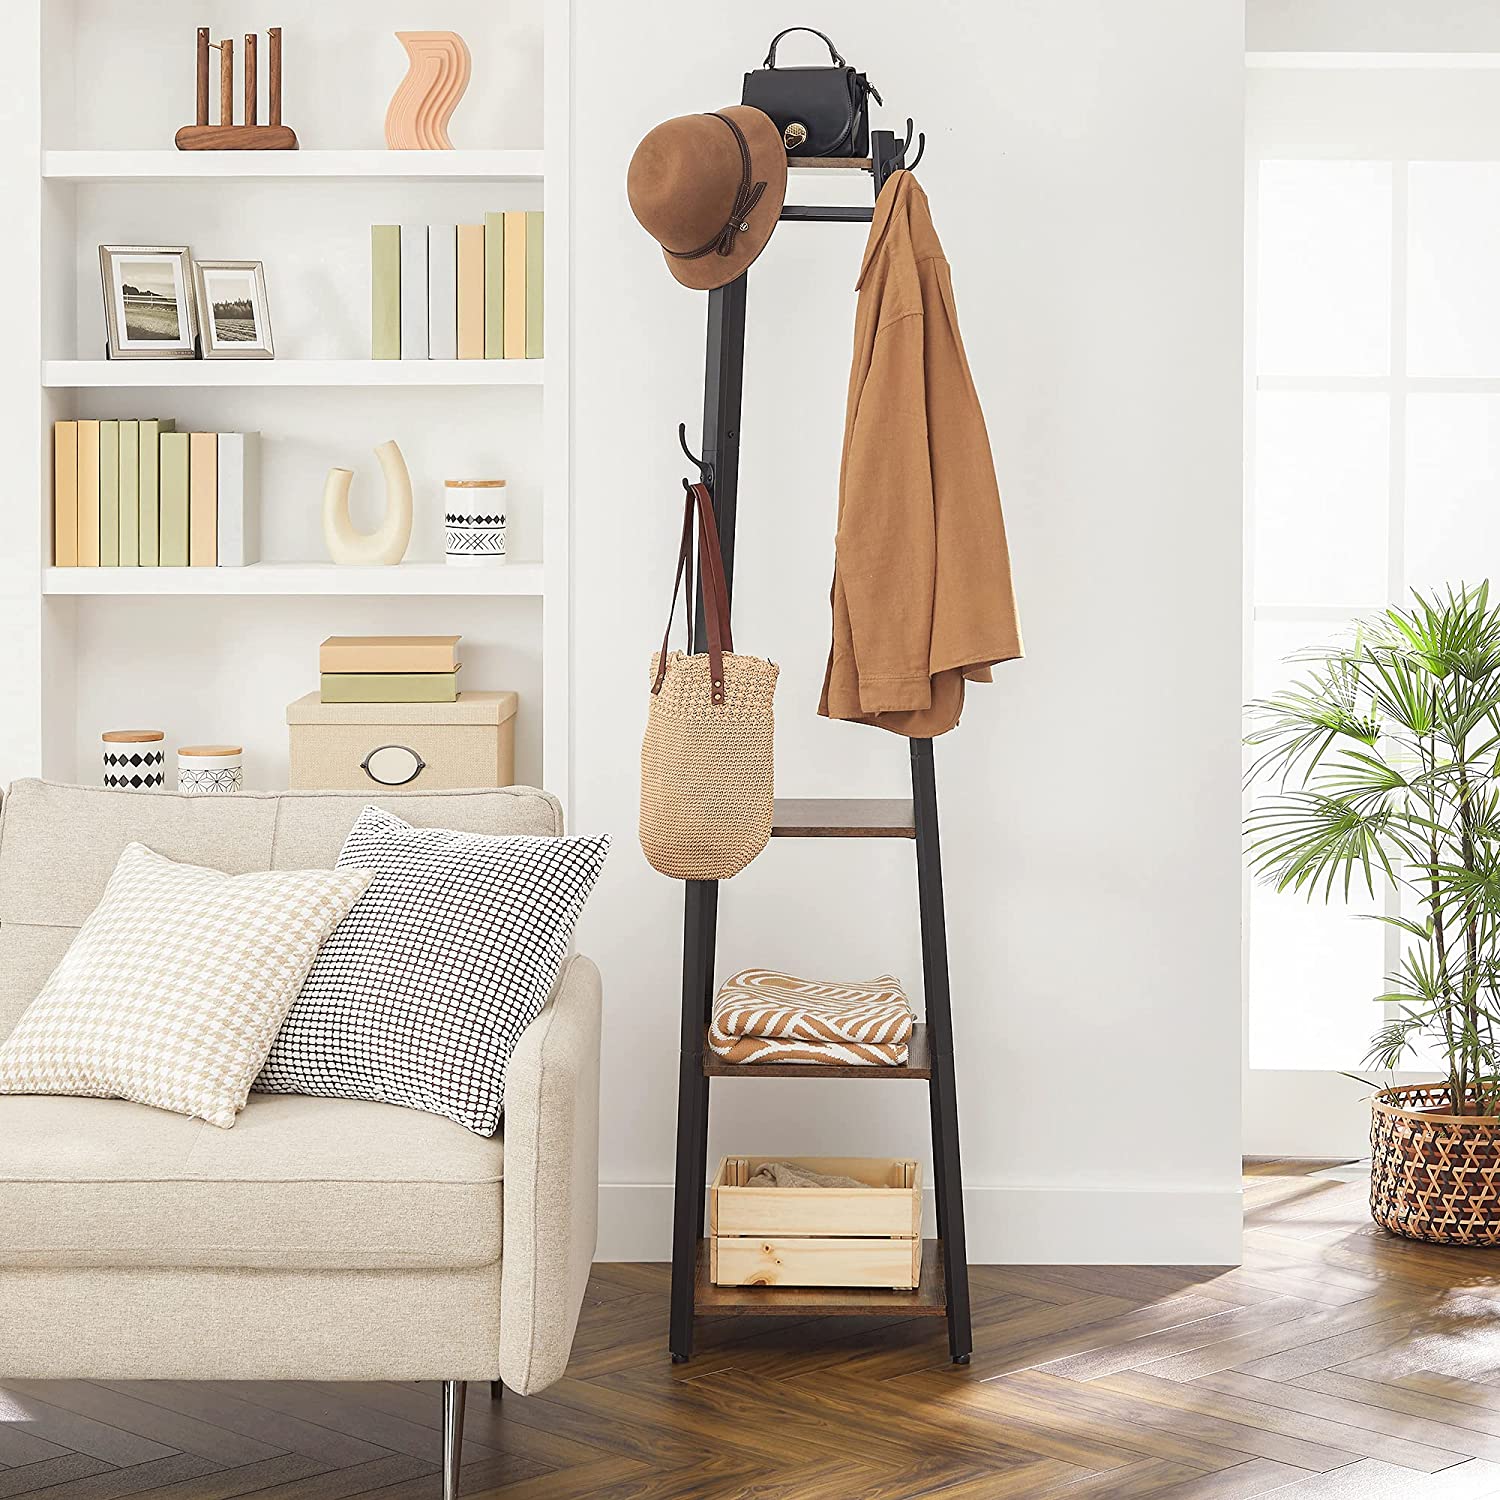 Coat Stand with 3 Shelves RAW58.dk